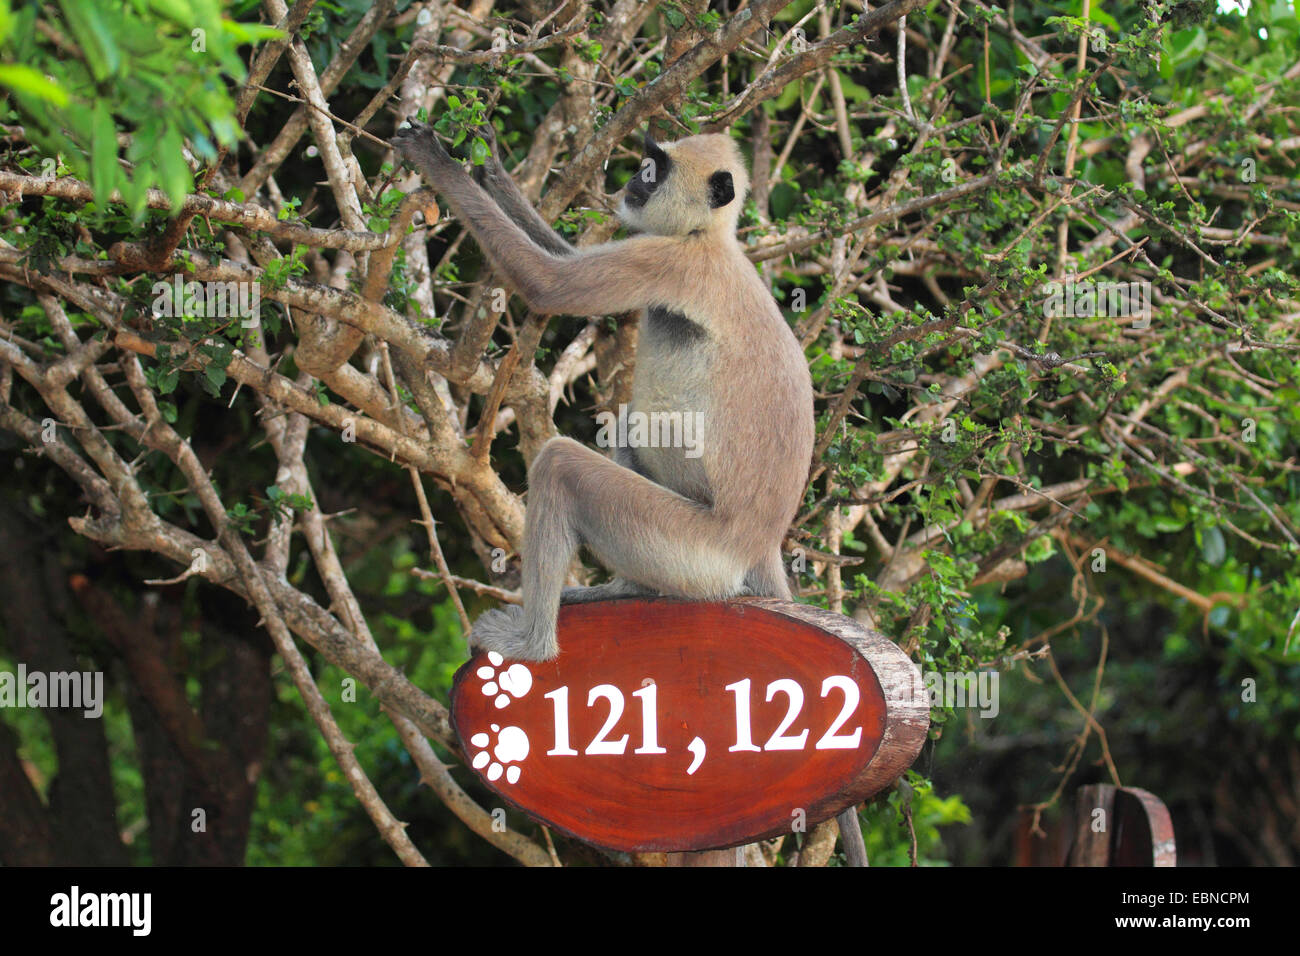 Tufted gray langur (Semnopithecus priam), sitting on a sign with house numbers, Sri Lanka, Yala National Park Stock Photo